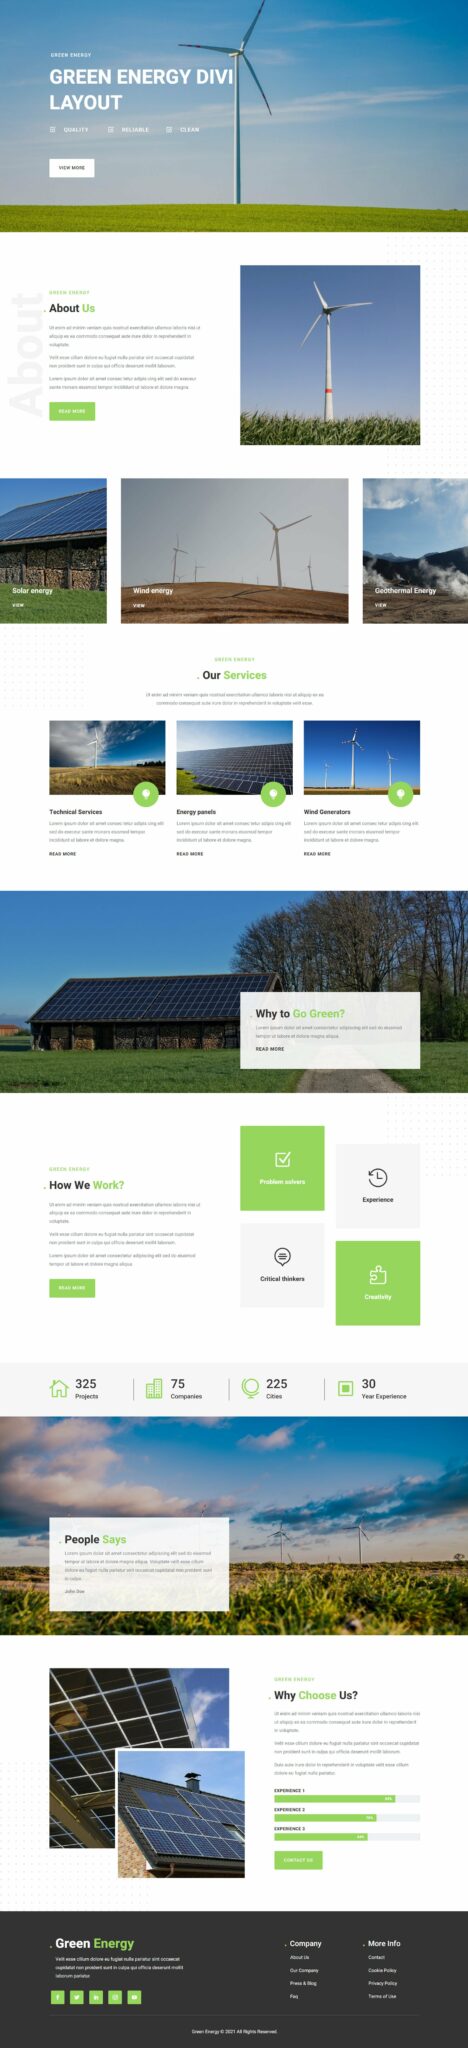 Divi Product Highlight Homepage 25 Divi Layout Pack Green Energy